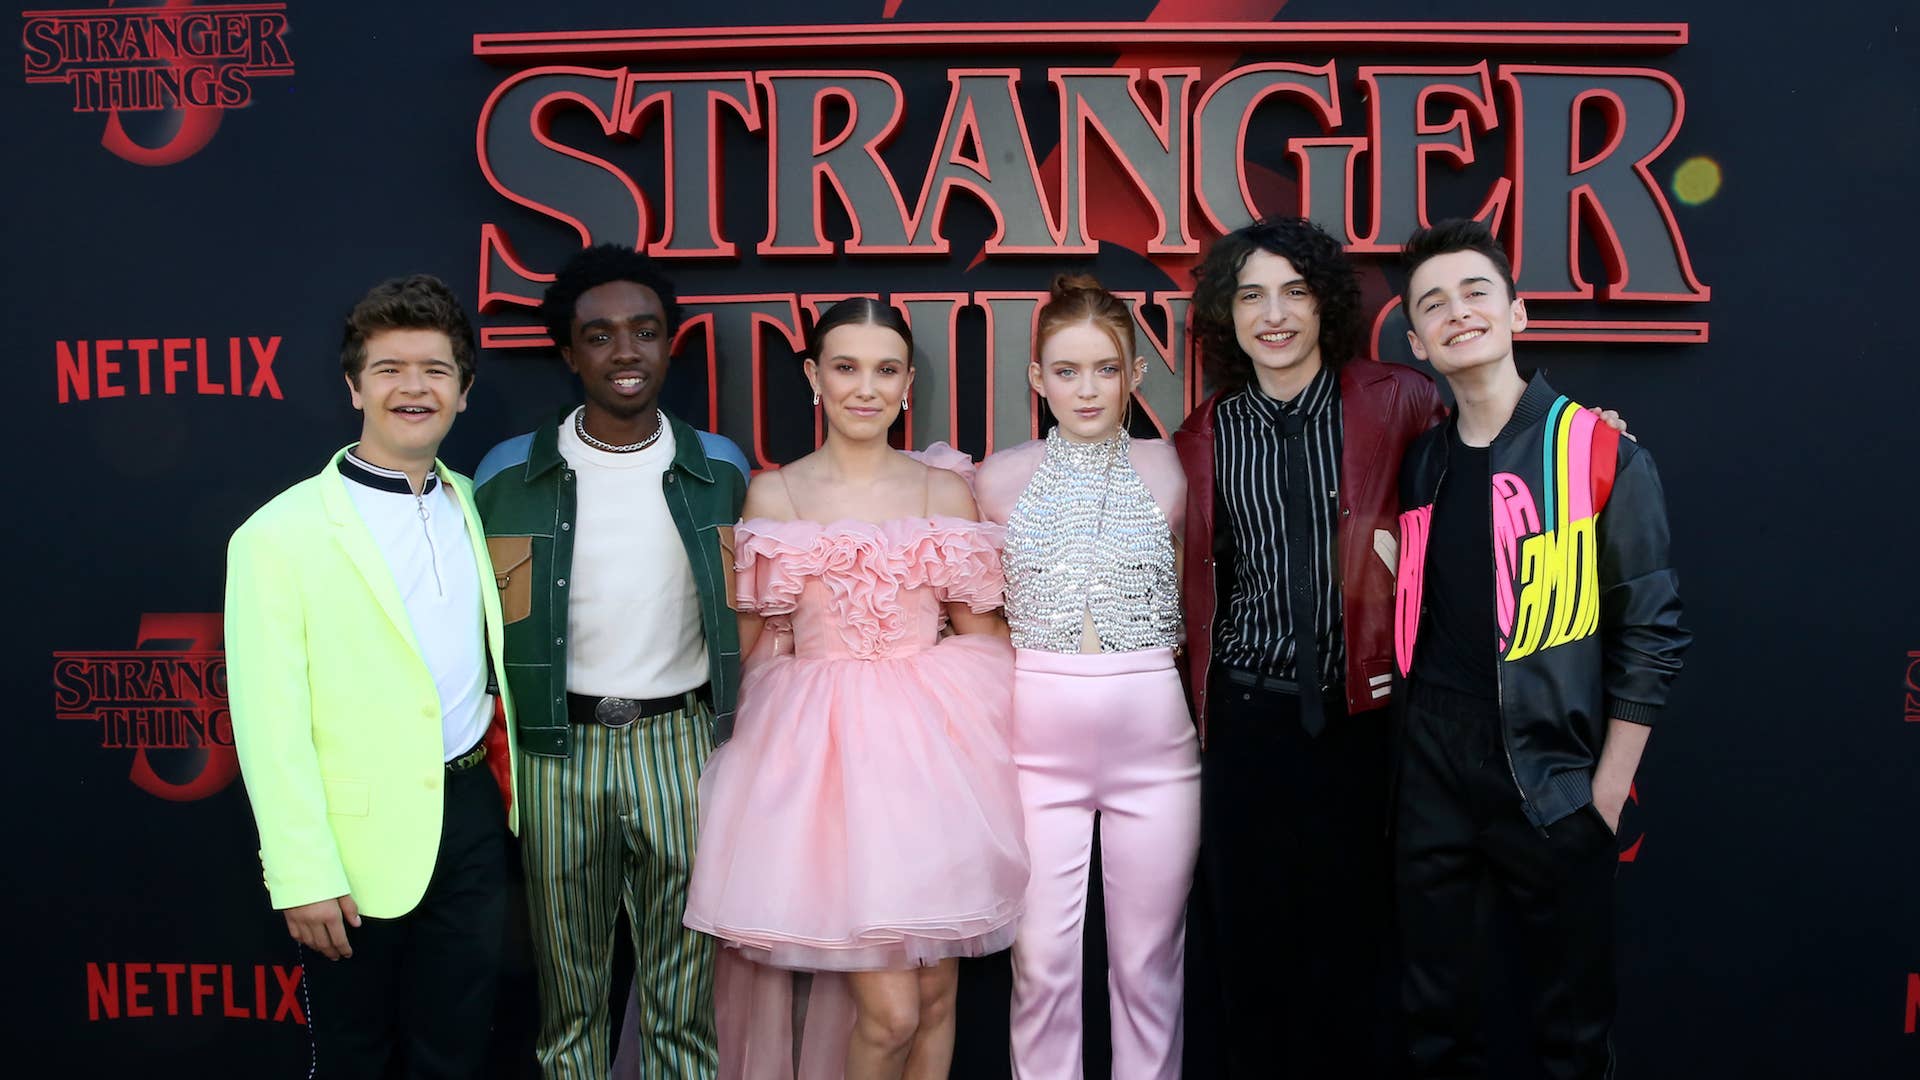 Cast attends the "Stranger Things" Season 3 World Premiere.